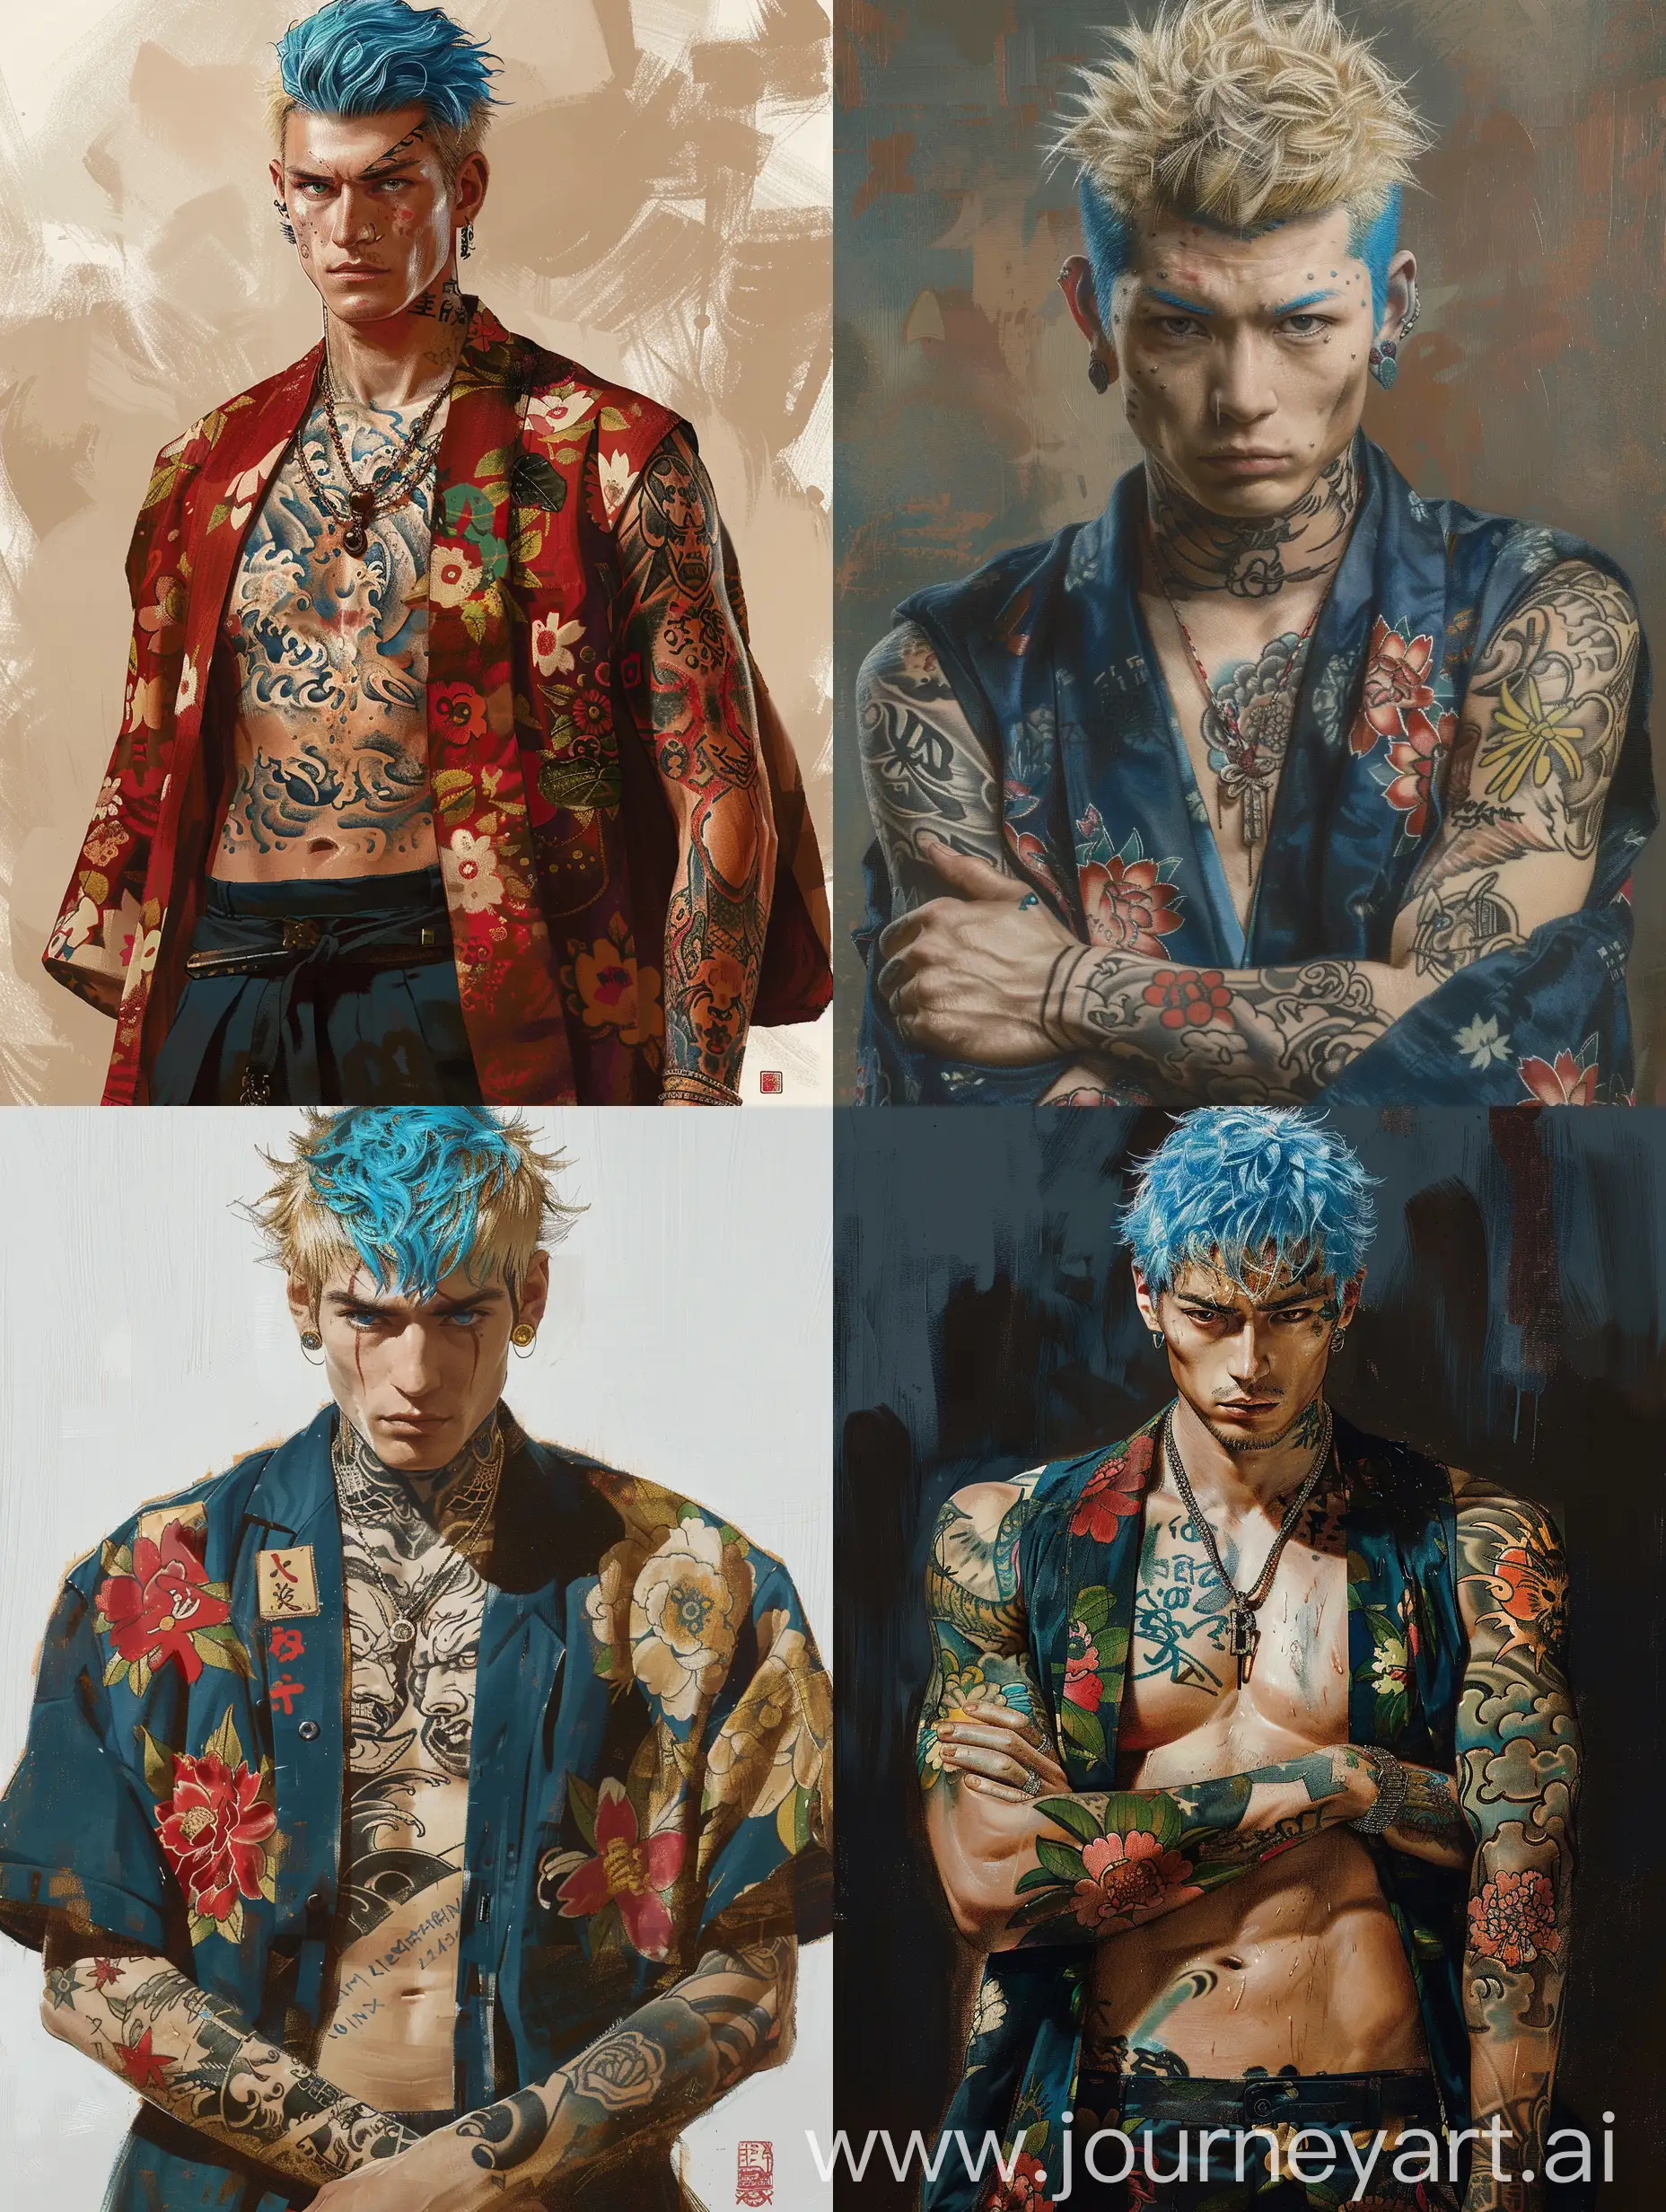 Young-Yakuza-Member-with-Unique-Heritage-and-Elaborate-Tattoos